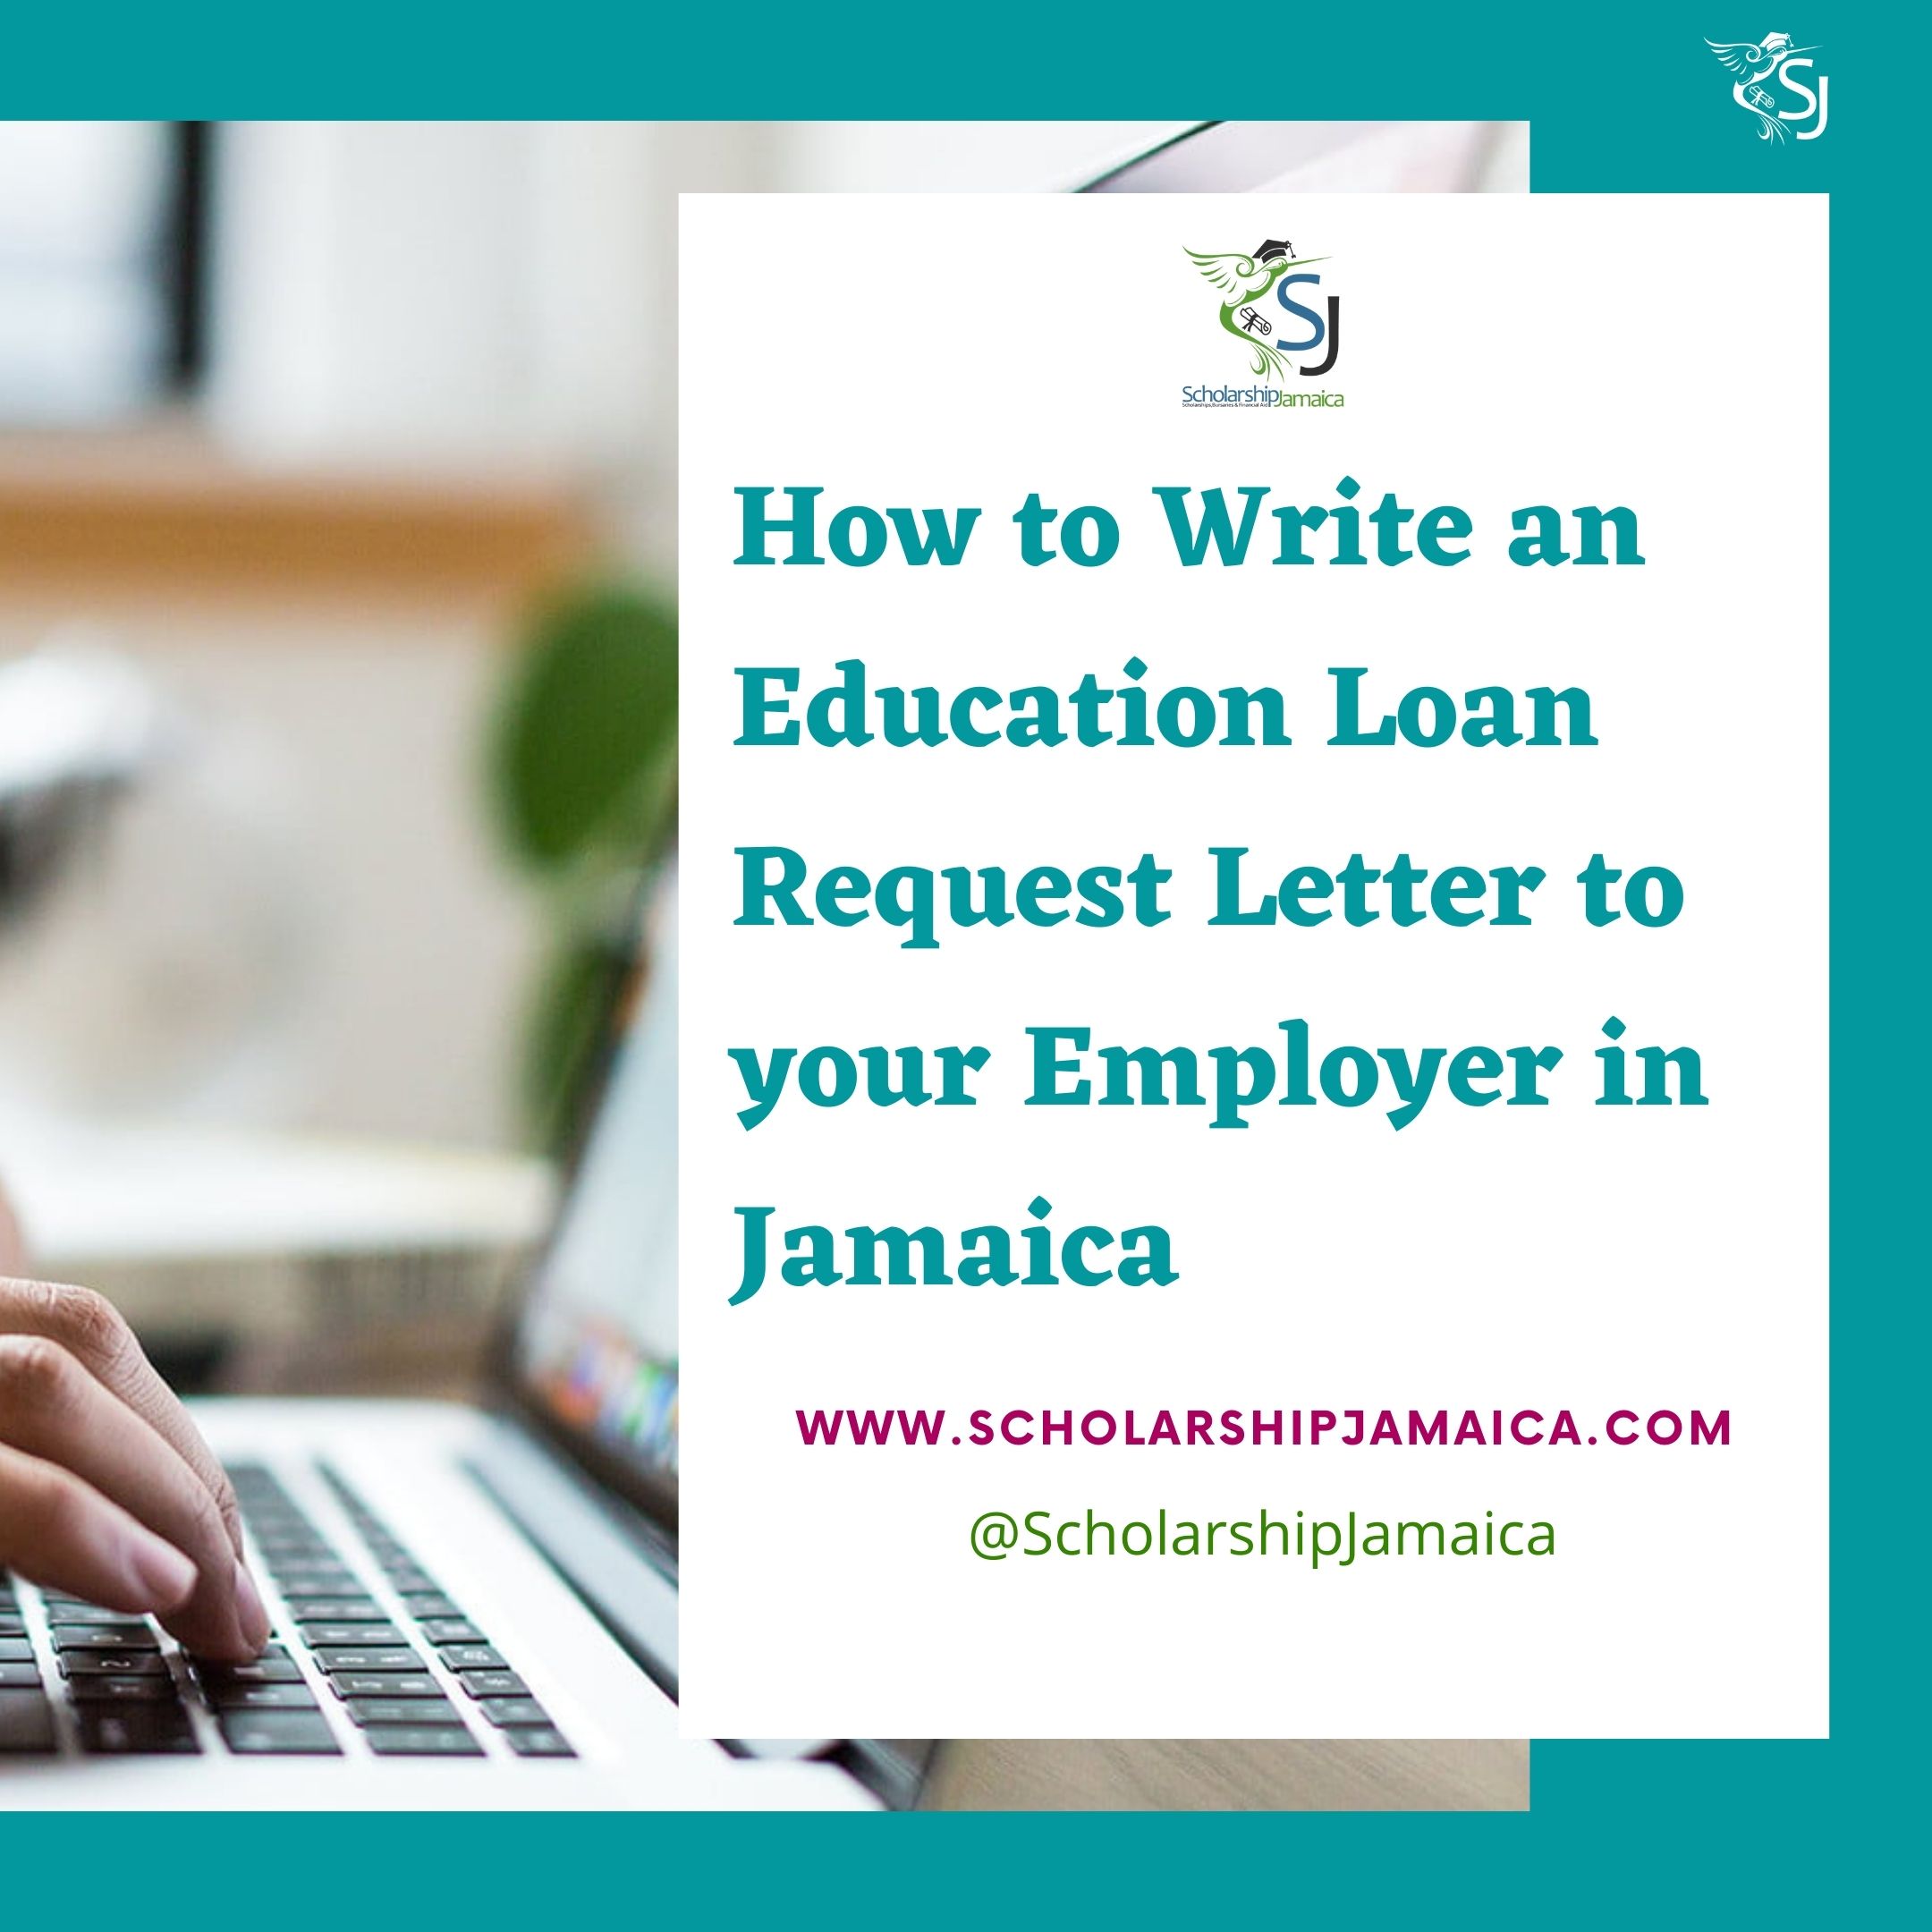 How to write an Education Loan Request Letter to your employer in Jamaica